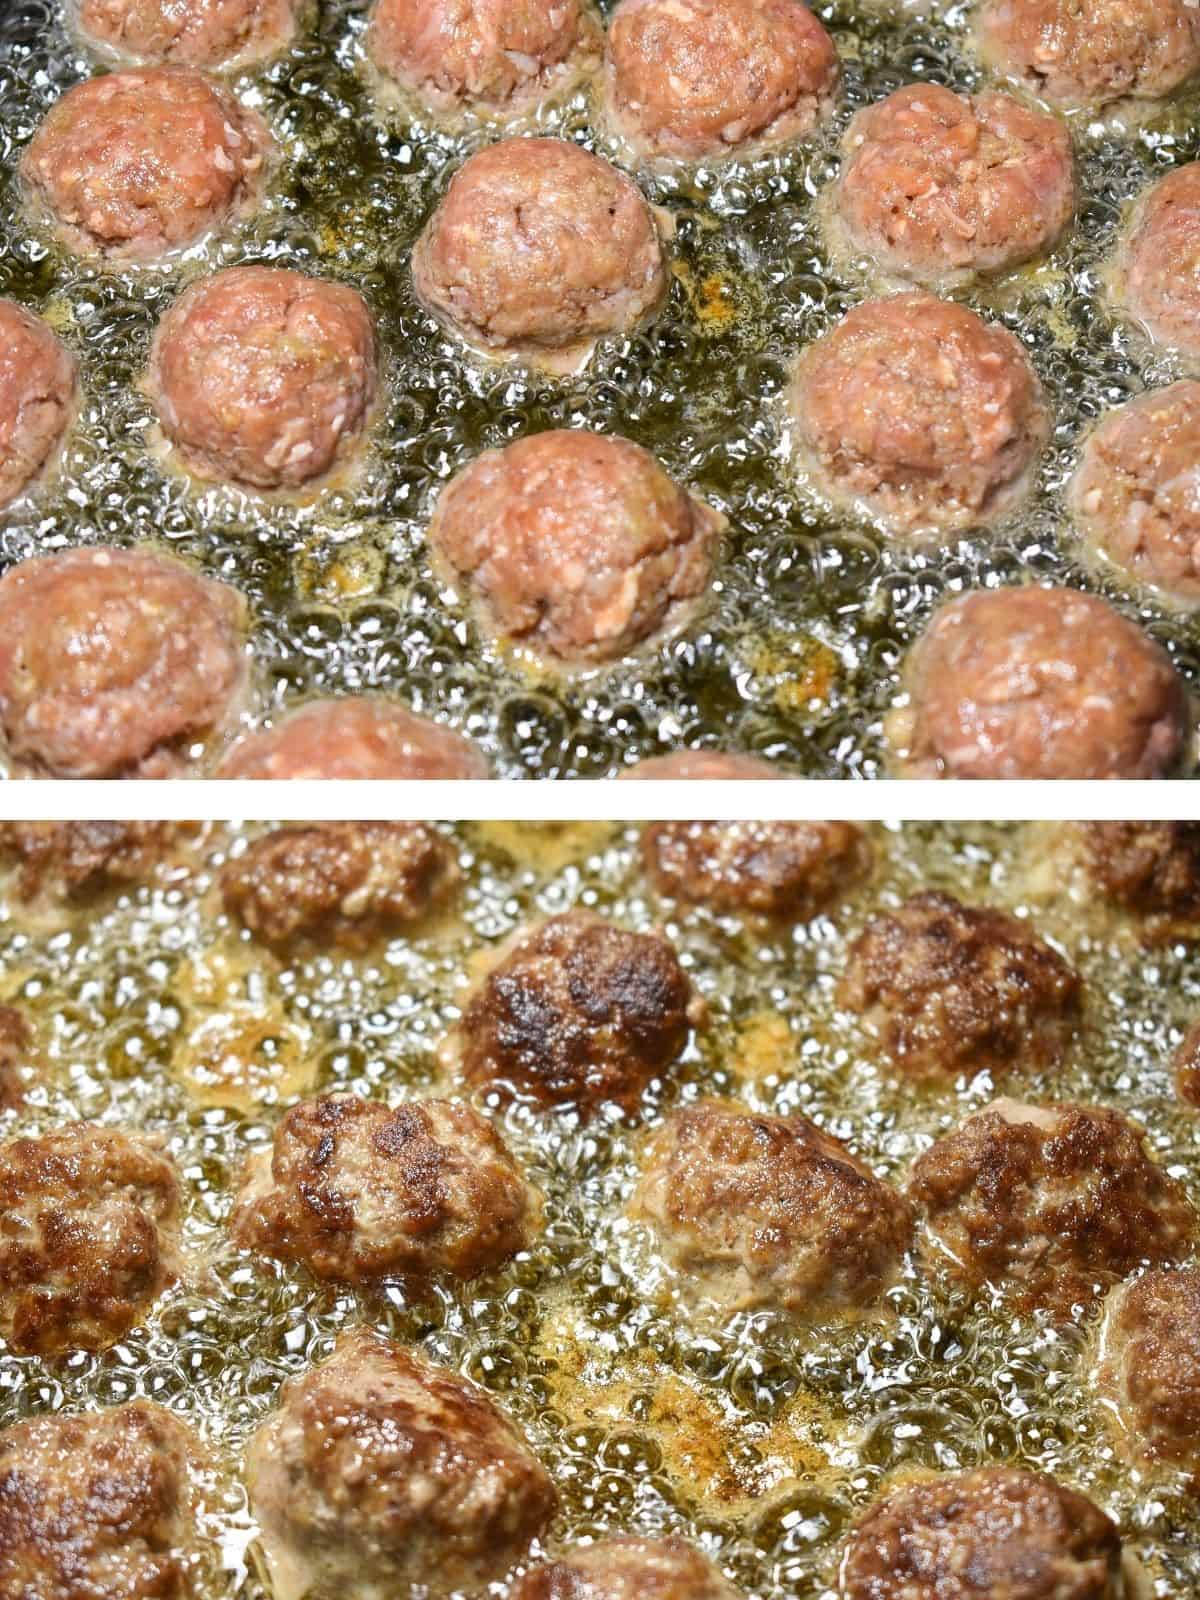 Two images showing meatballs frying.